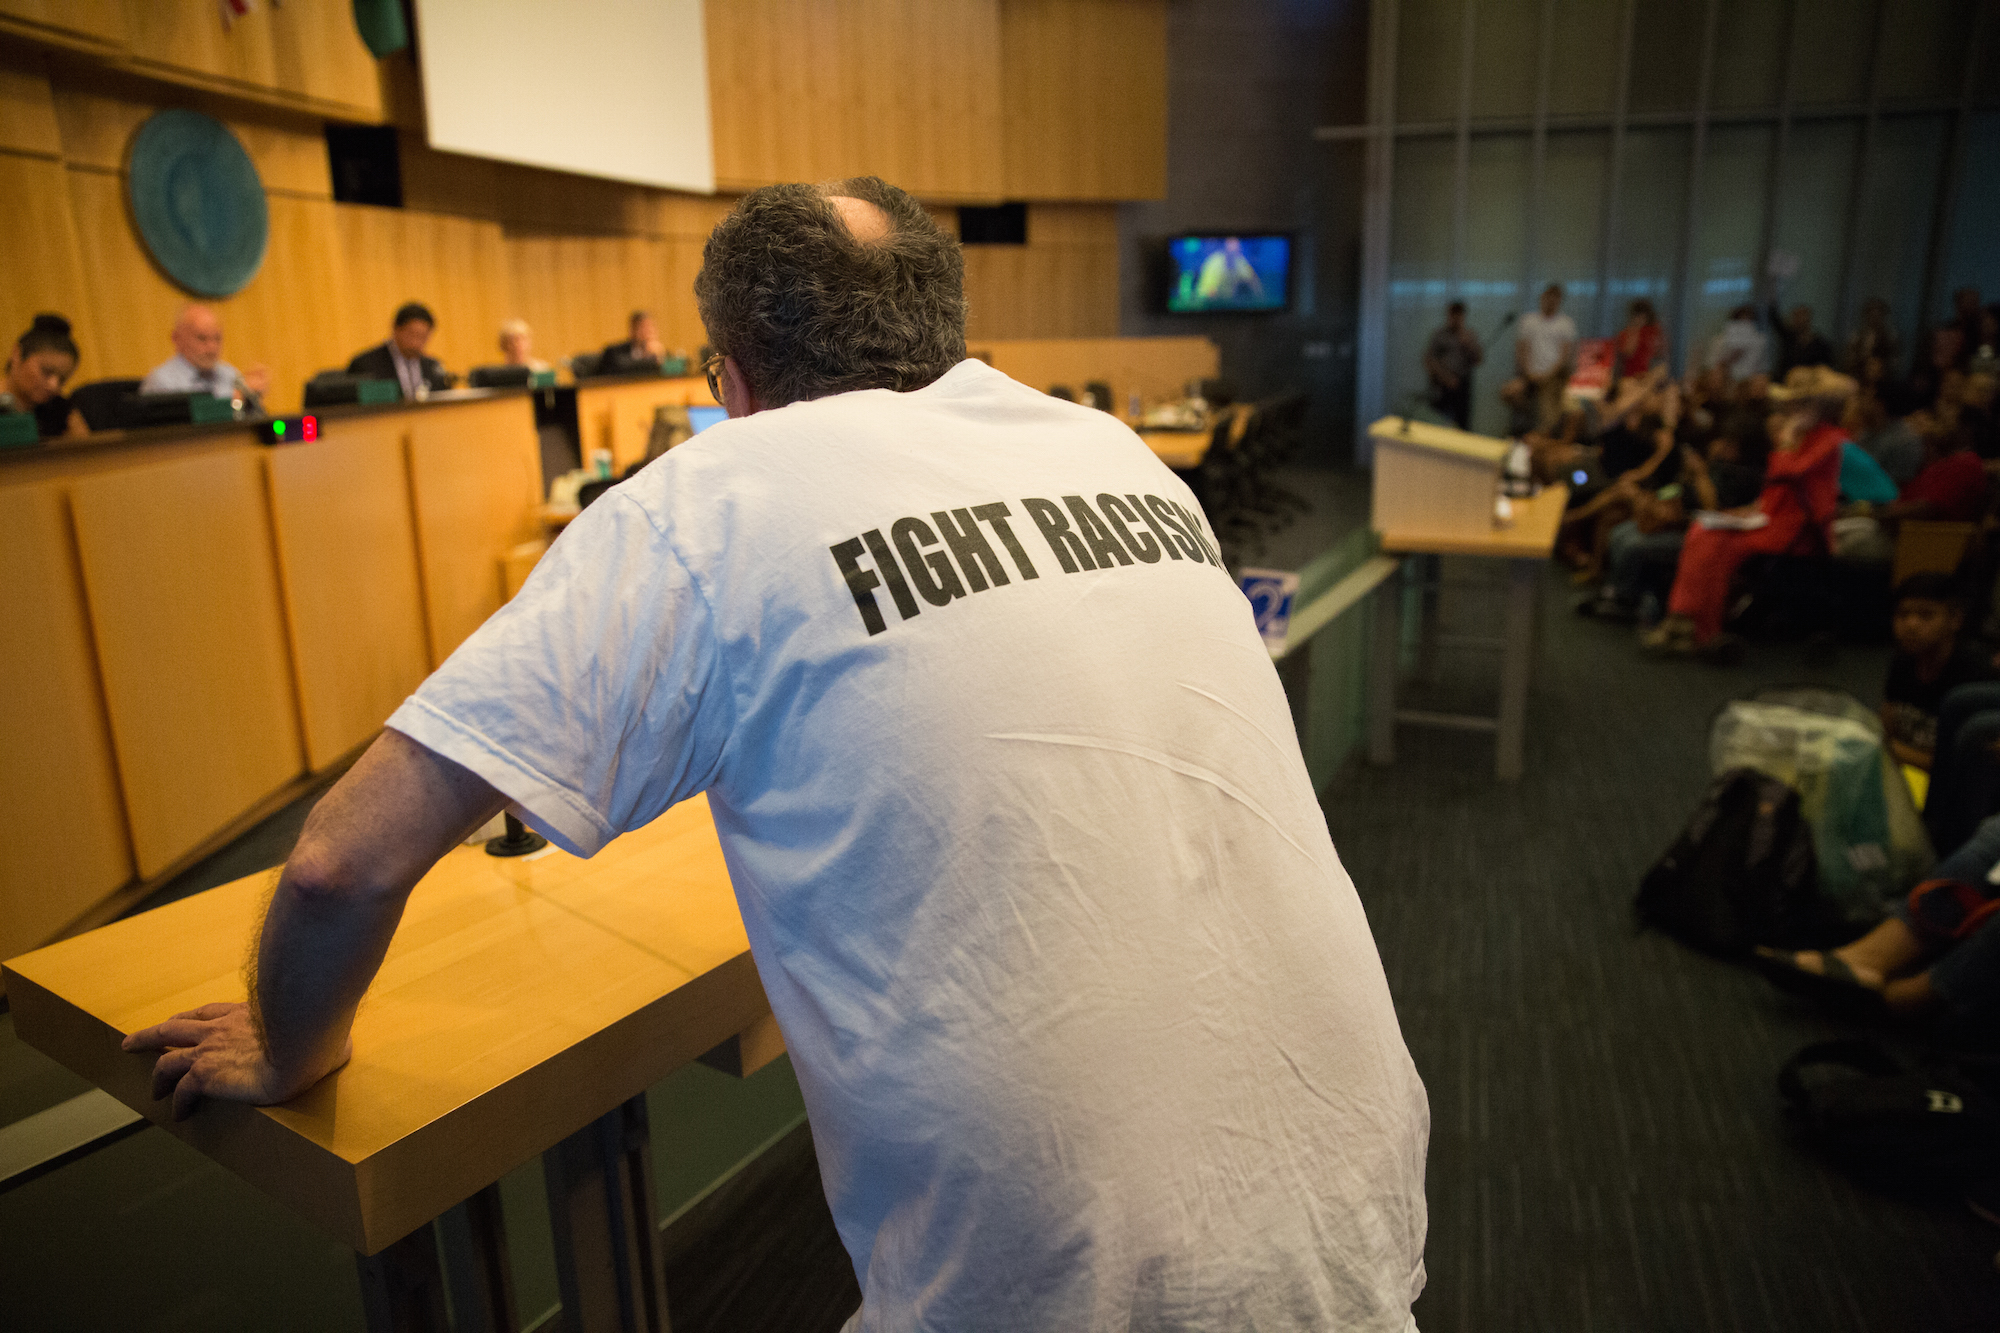 City Hall Needs to Stop Dismissing, and Start Addressing, Questions About the North Precinct